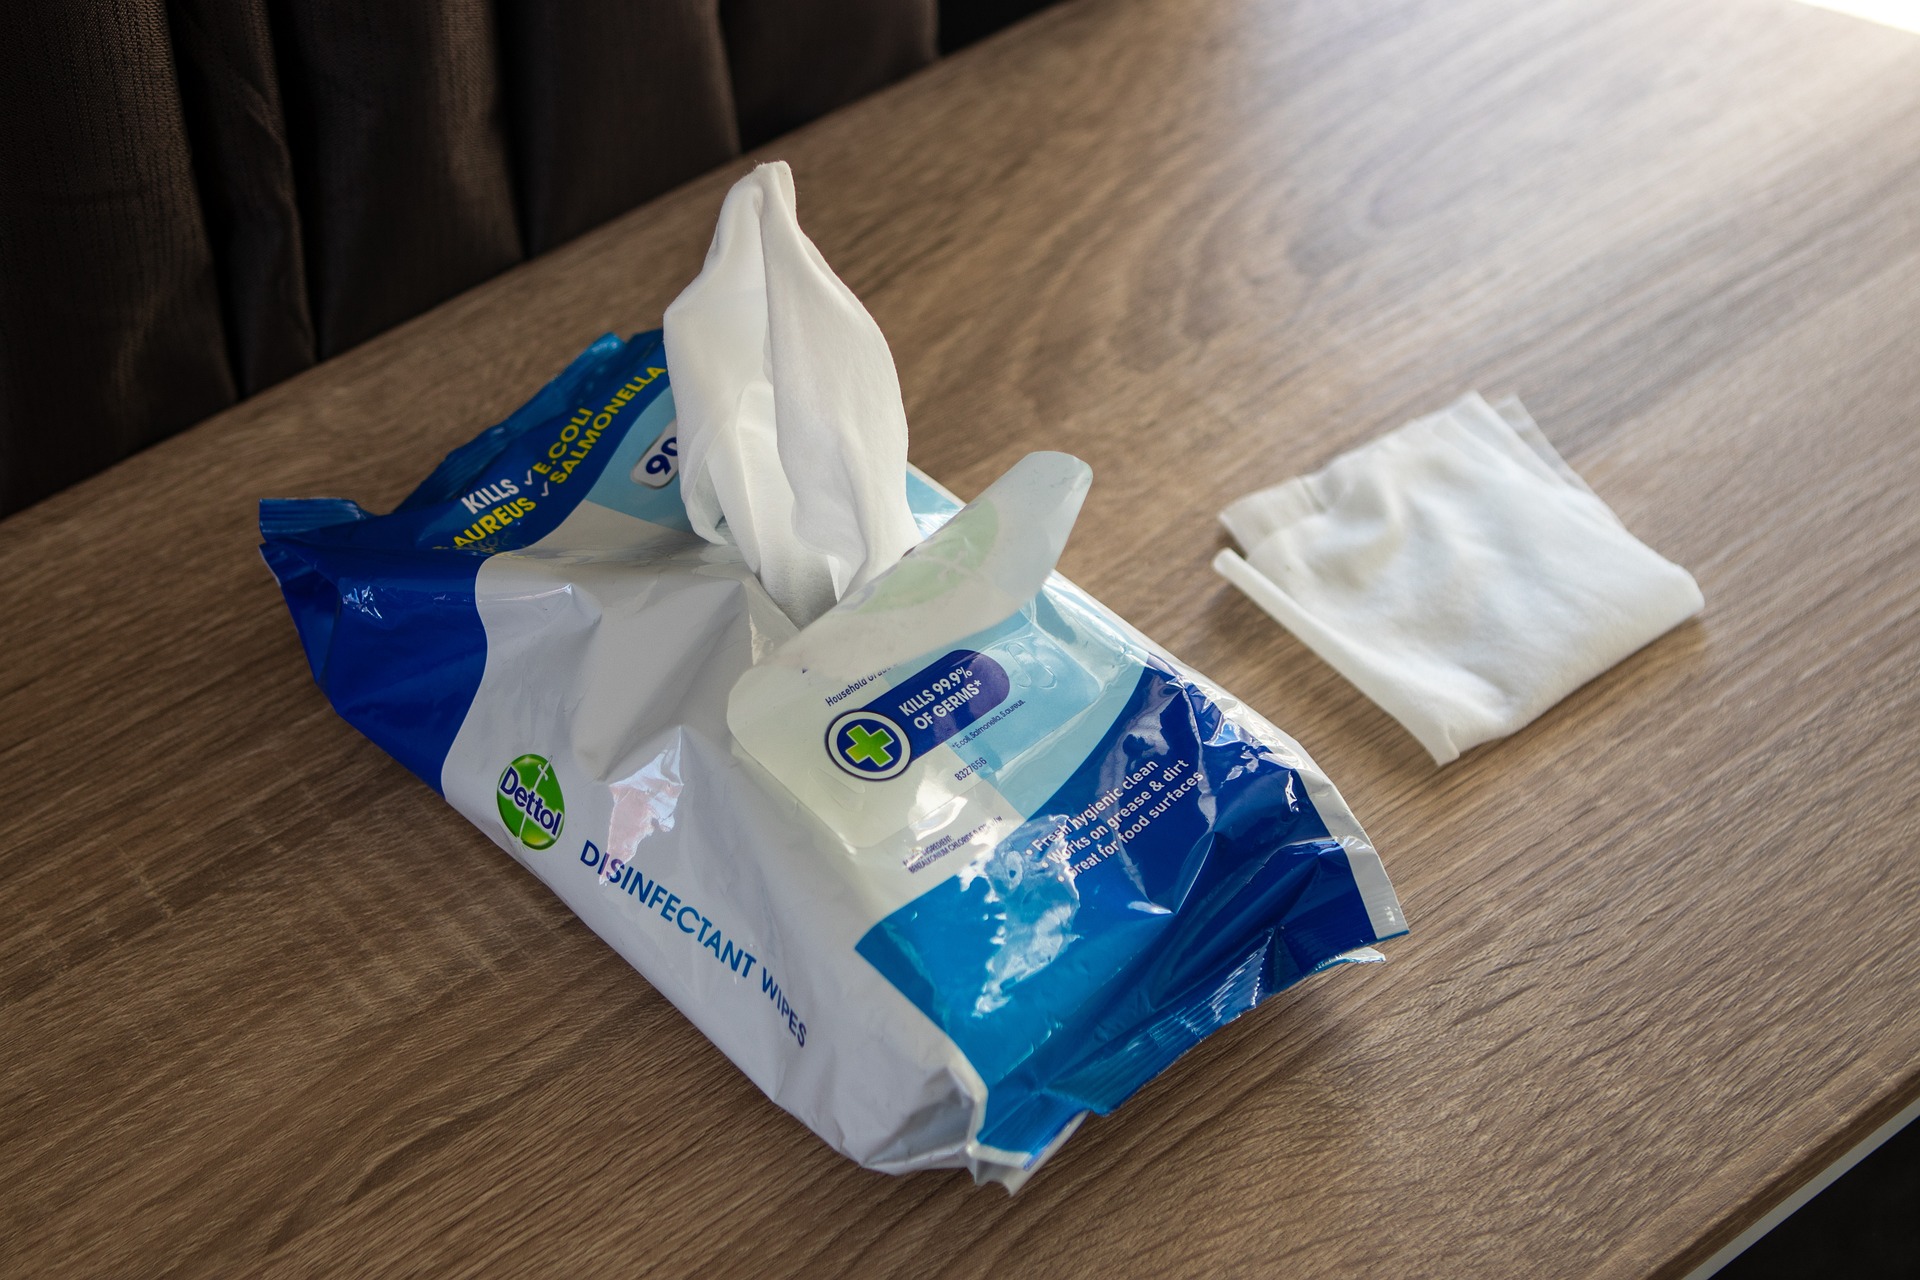 A pack of wet wipes | Source: Pixabay